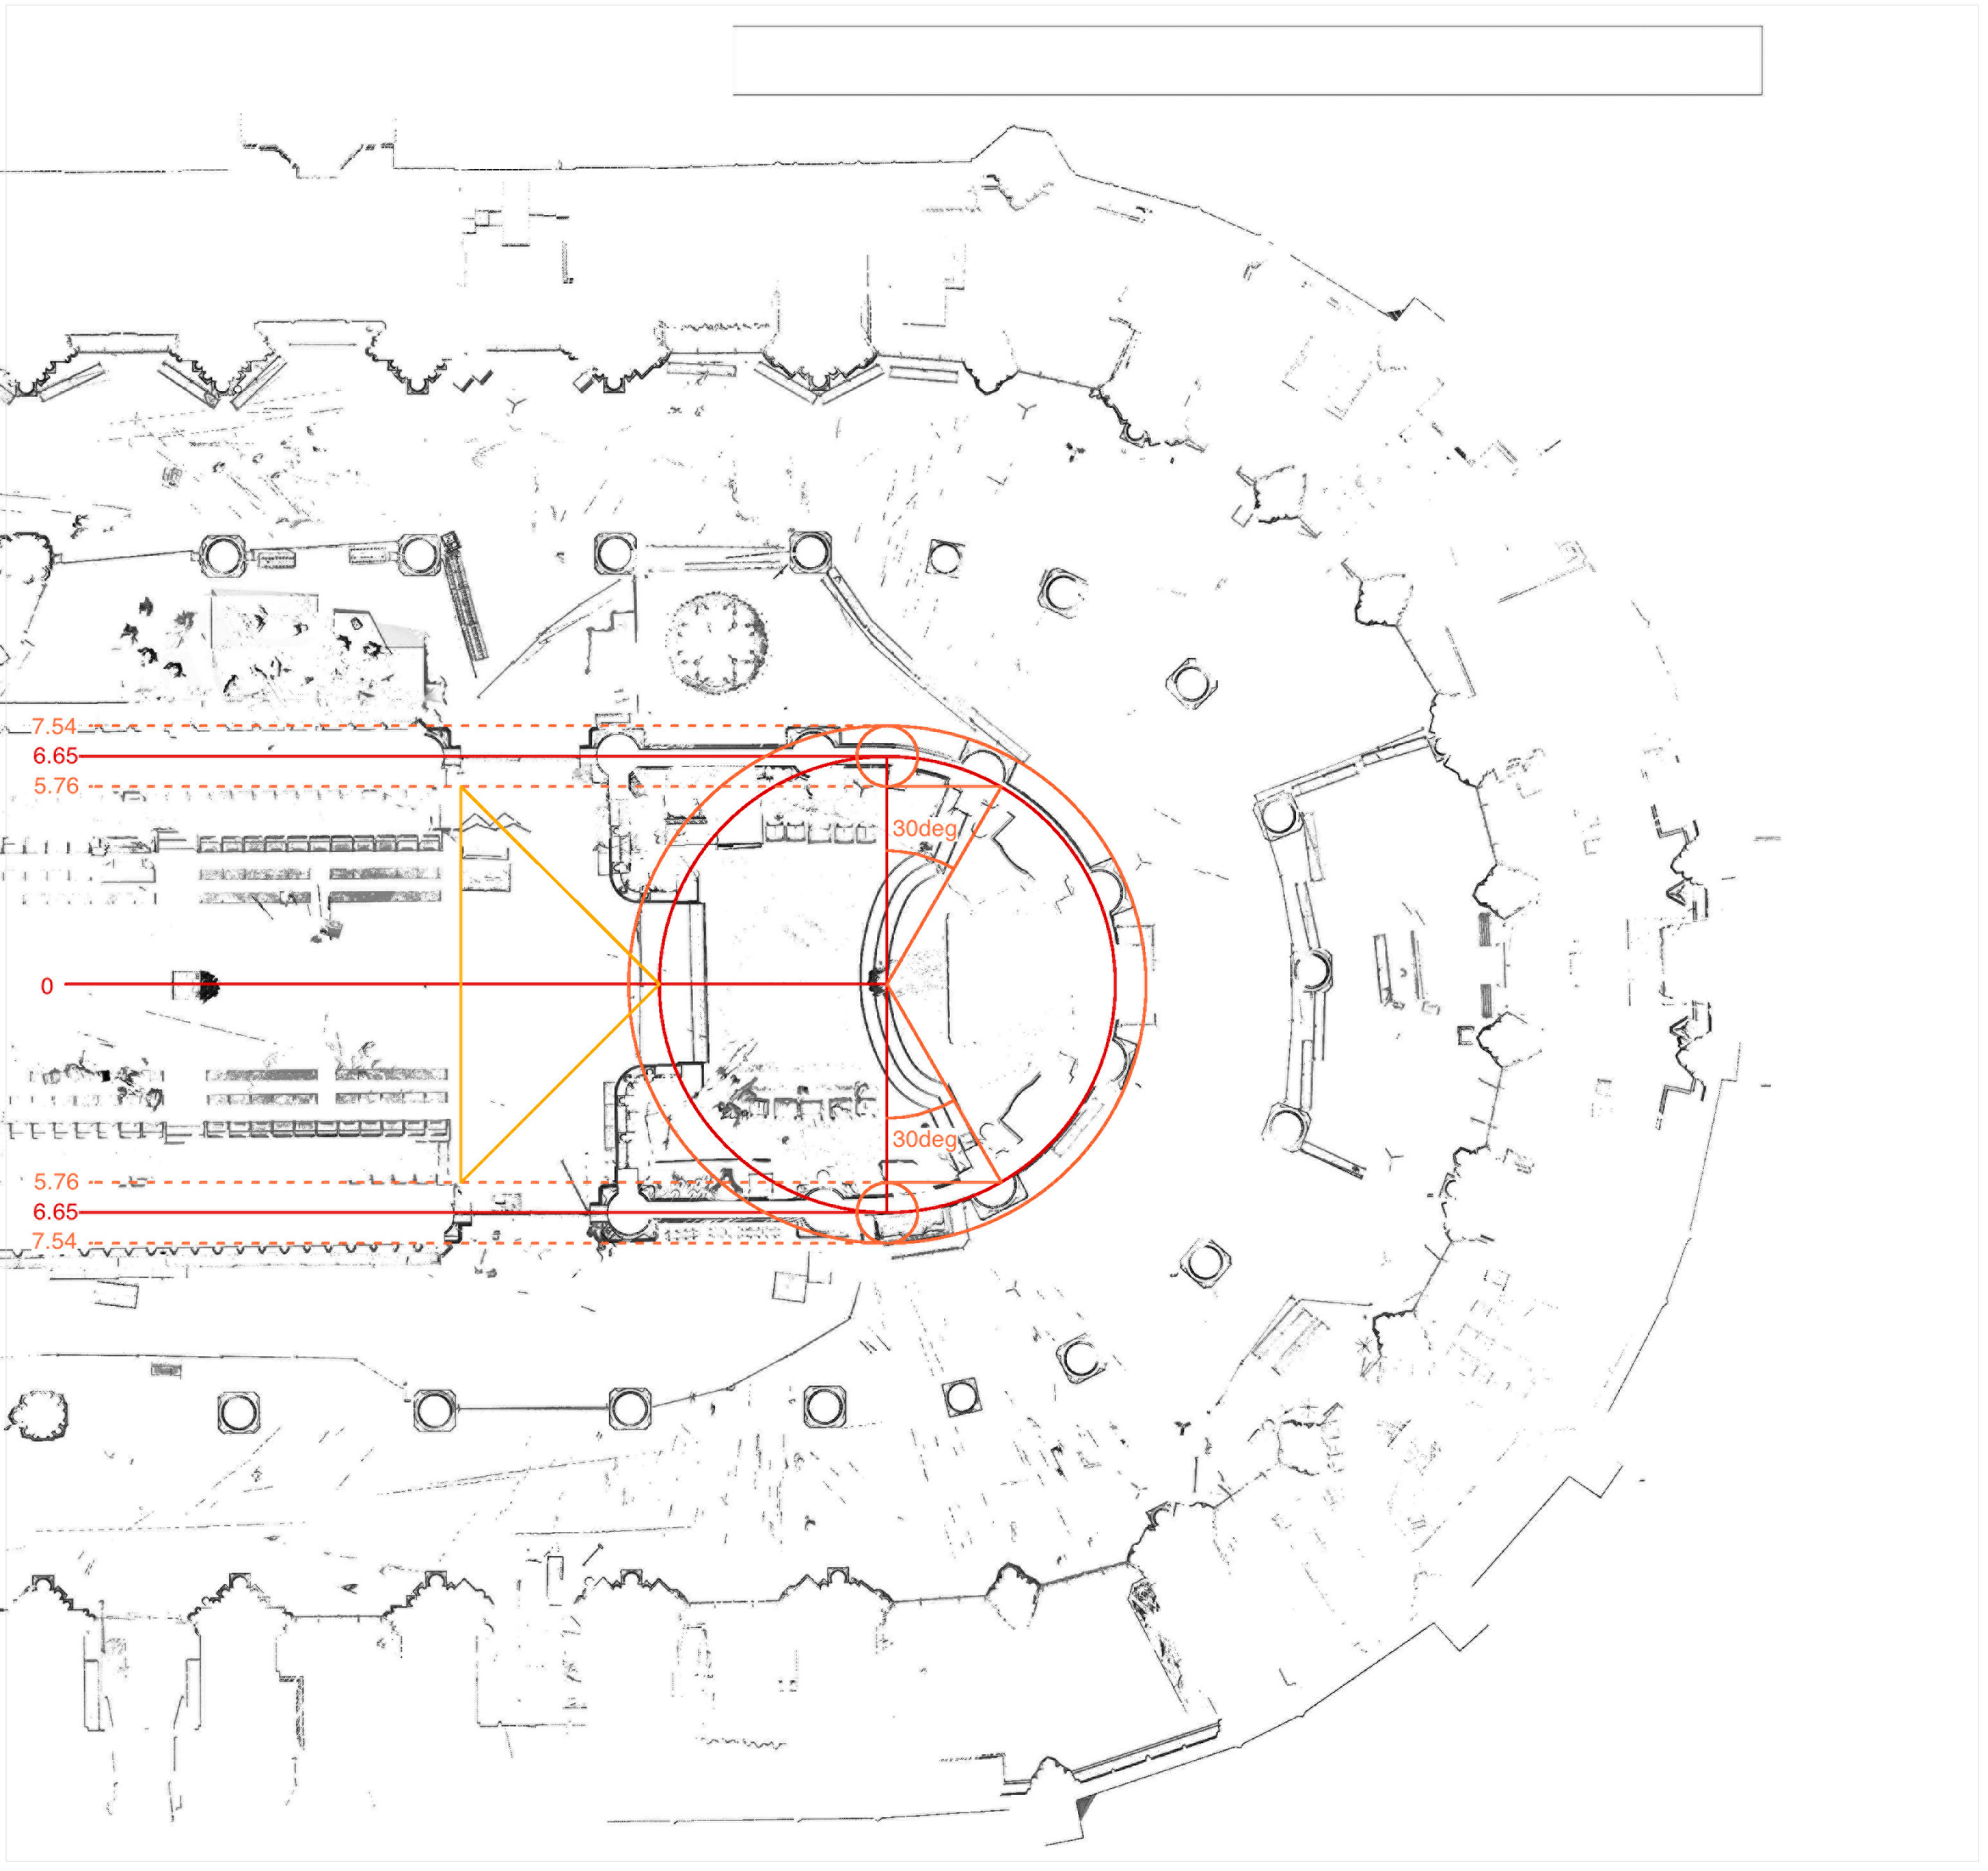 Partial plan of Notre-Dame in Paris, according to laser scan data by Andrew Tallon, showing establishment of inner aisle radius.